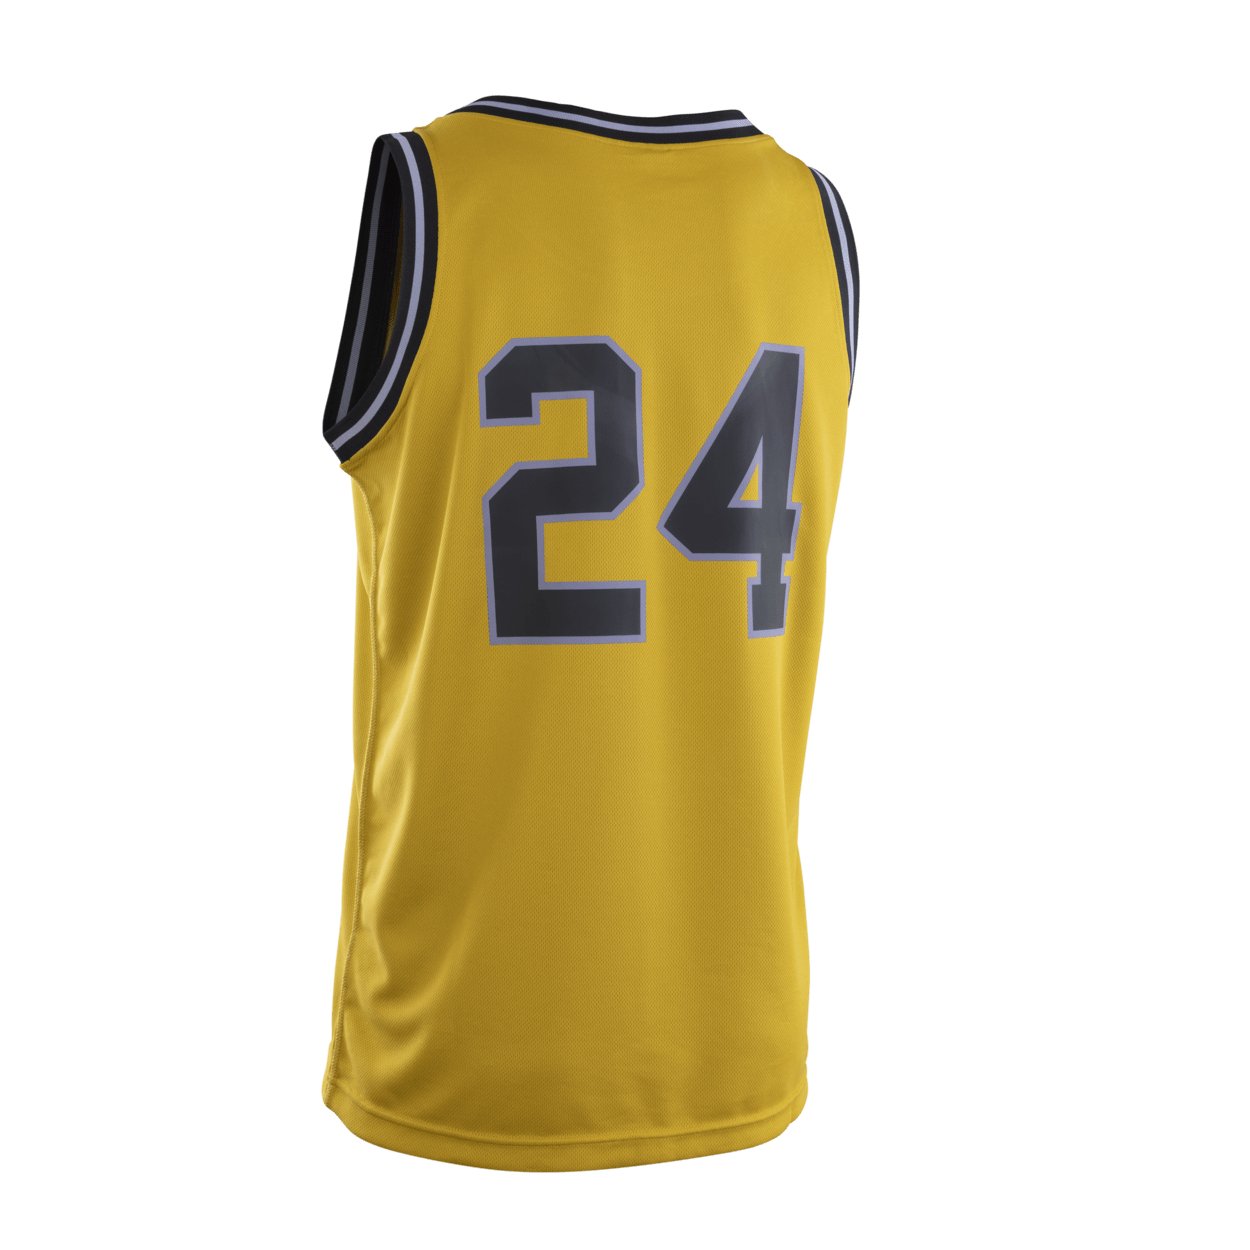 ION Basketball Shirt 2024 - Worthing Watersports - 9010583168838 - Tops - ION Water